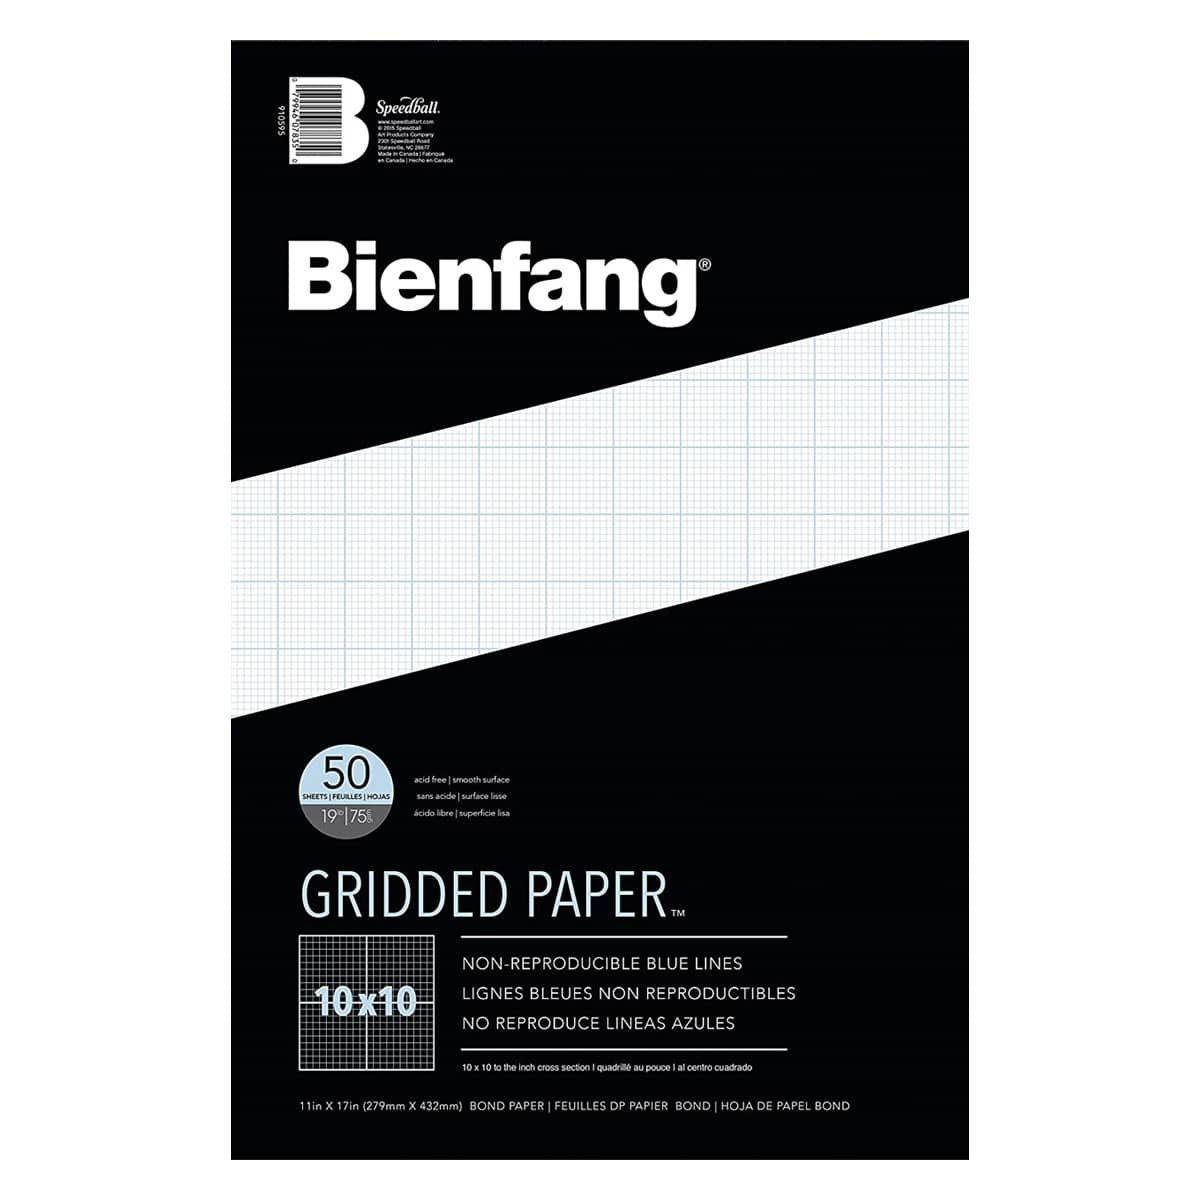 Clearprint Vellum Sheets with Engineer Title Block, 11x17 Inches